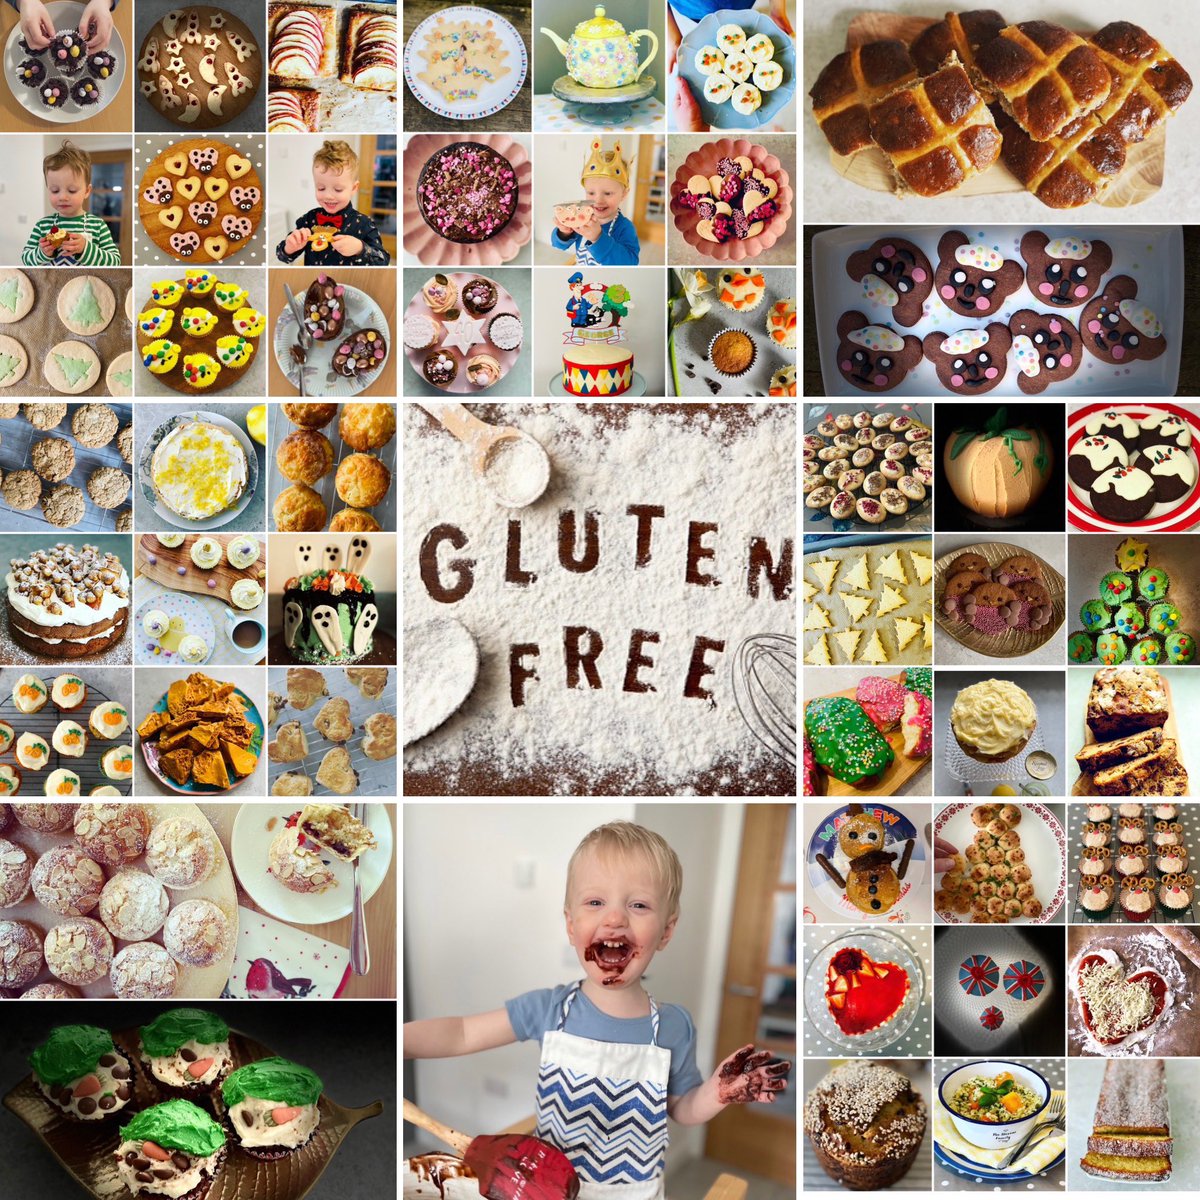 It’s #CoeliacAwarenessMonth. Did you know Coeliac disease affects at least 1 in 100 people in the UK & in Europe. Here are 100 #glutenfreebakes from @beckyexcell @bbcgoodfood @GFBlogger @jamieoliver  @Nigella_Lawson @janecdevonshire @bakewithstork @gbchefs @Coeliac_UK 💕 👩‍🍳 🍰